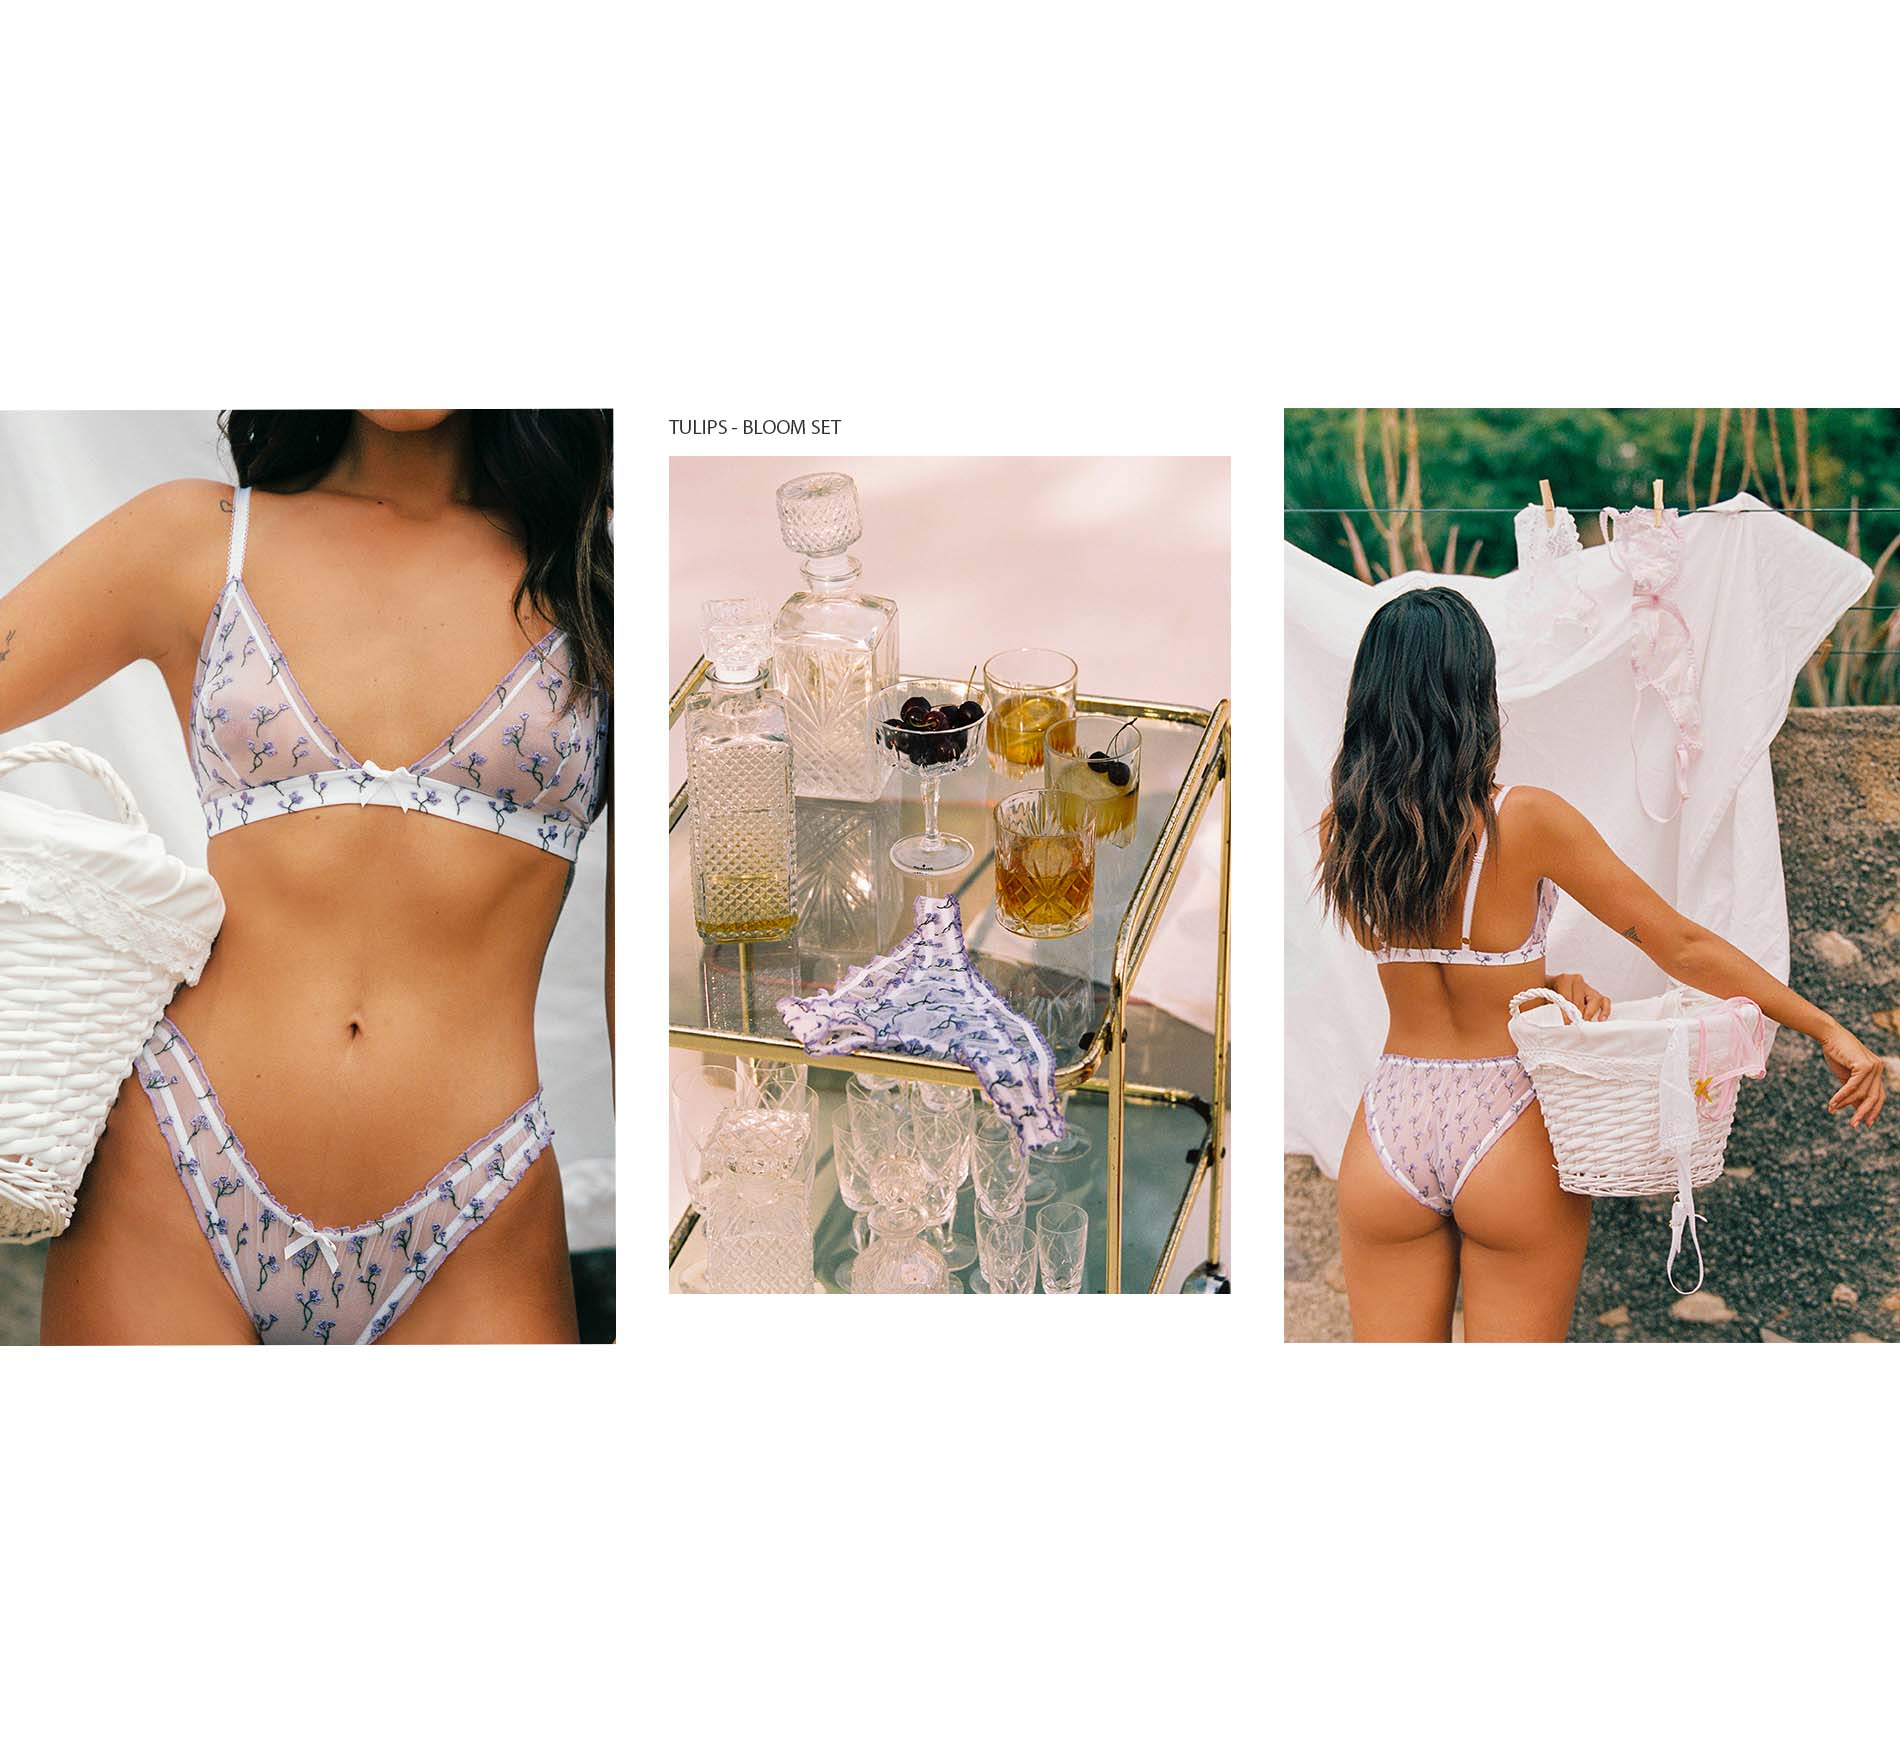 Lookbook Khassani Khassani Intimates: Reveal your femininity with our new lingerie collection